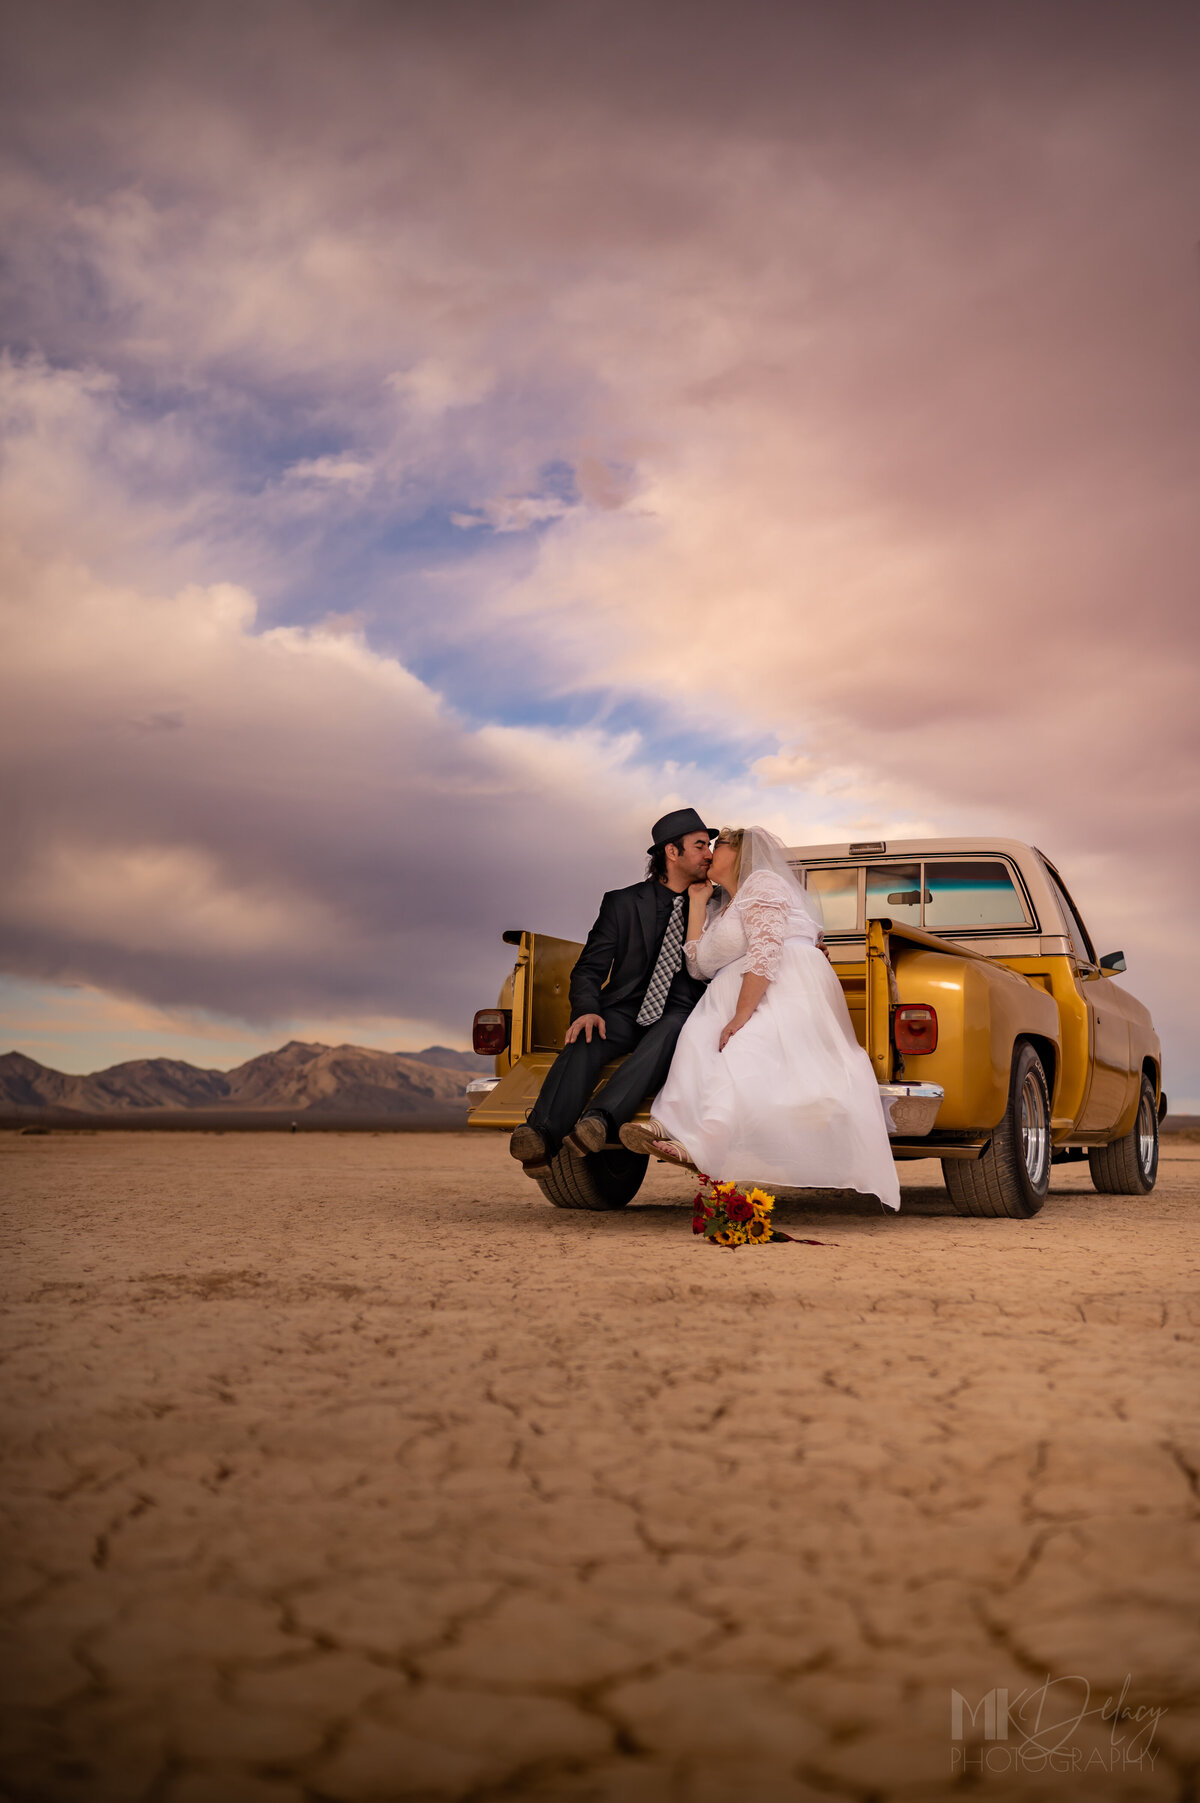 bride and groom sit on the tailgate of his gold antique remodeled checy on a dry lake bed Dry lake bed elopement bride in lace wedding gown with glasses groom in black suit white dress shirt with  fedora  classic chevy truck gold  restored with golden hour sunlight las vegas wedding photography las vegas elopement las vegas wedding photographers mk delacy photography